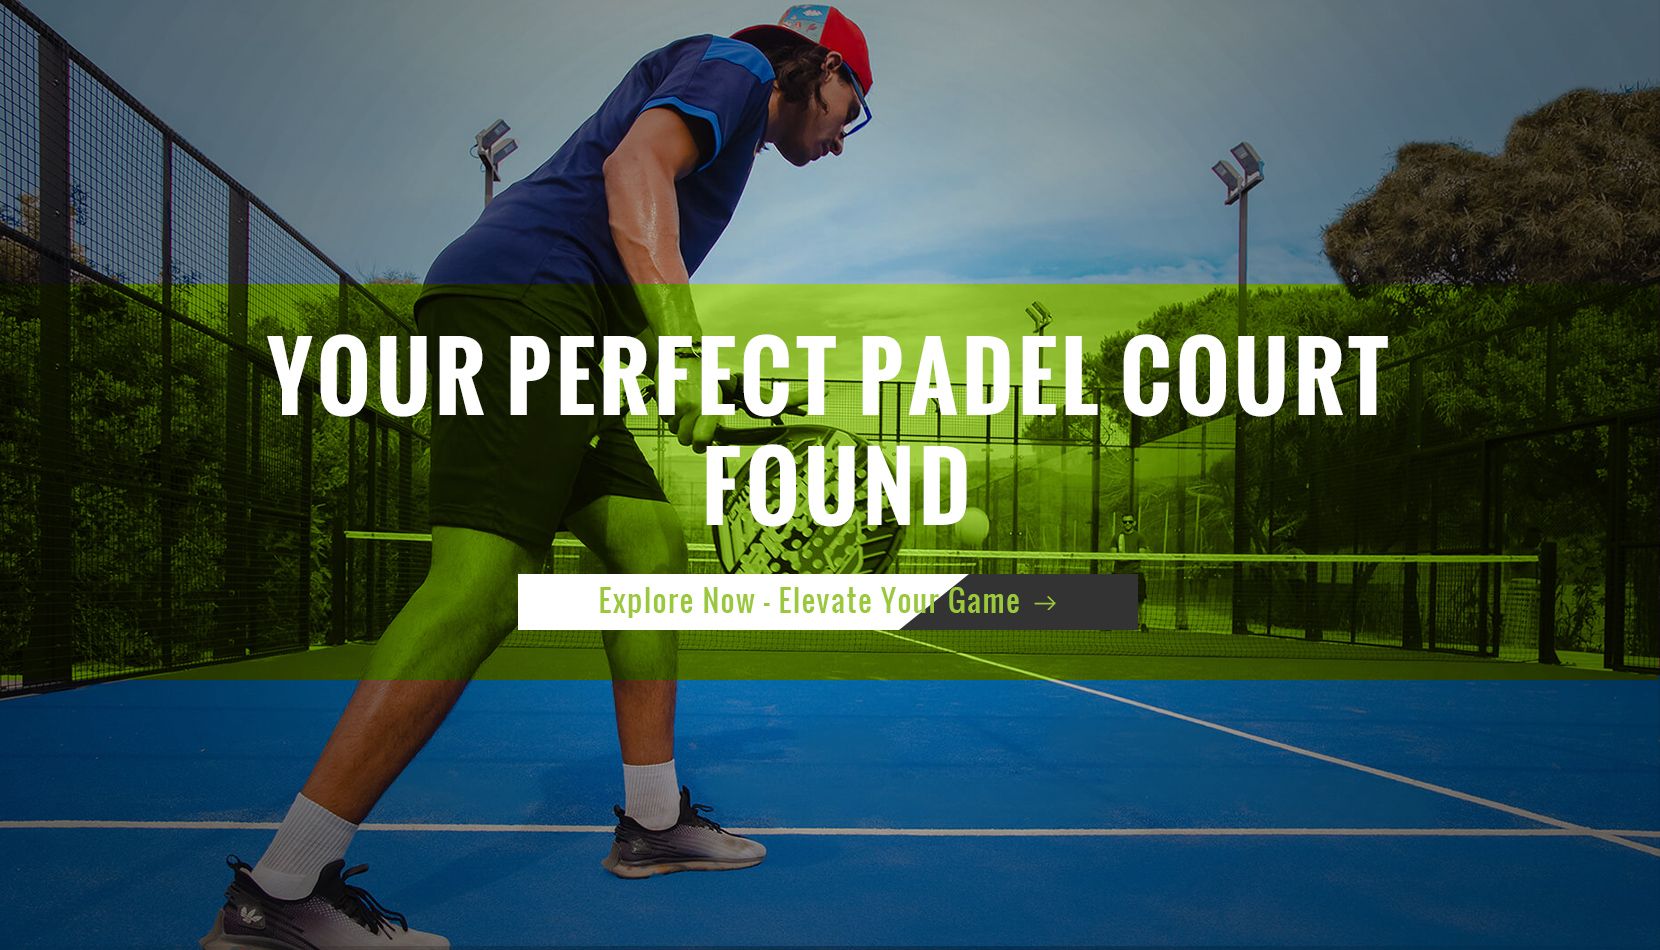 Your perfect padel court found